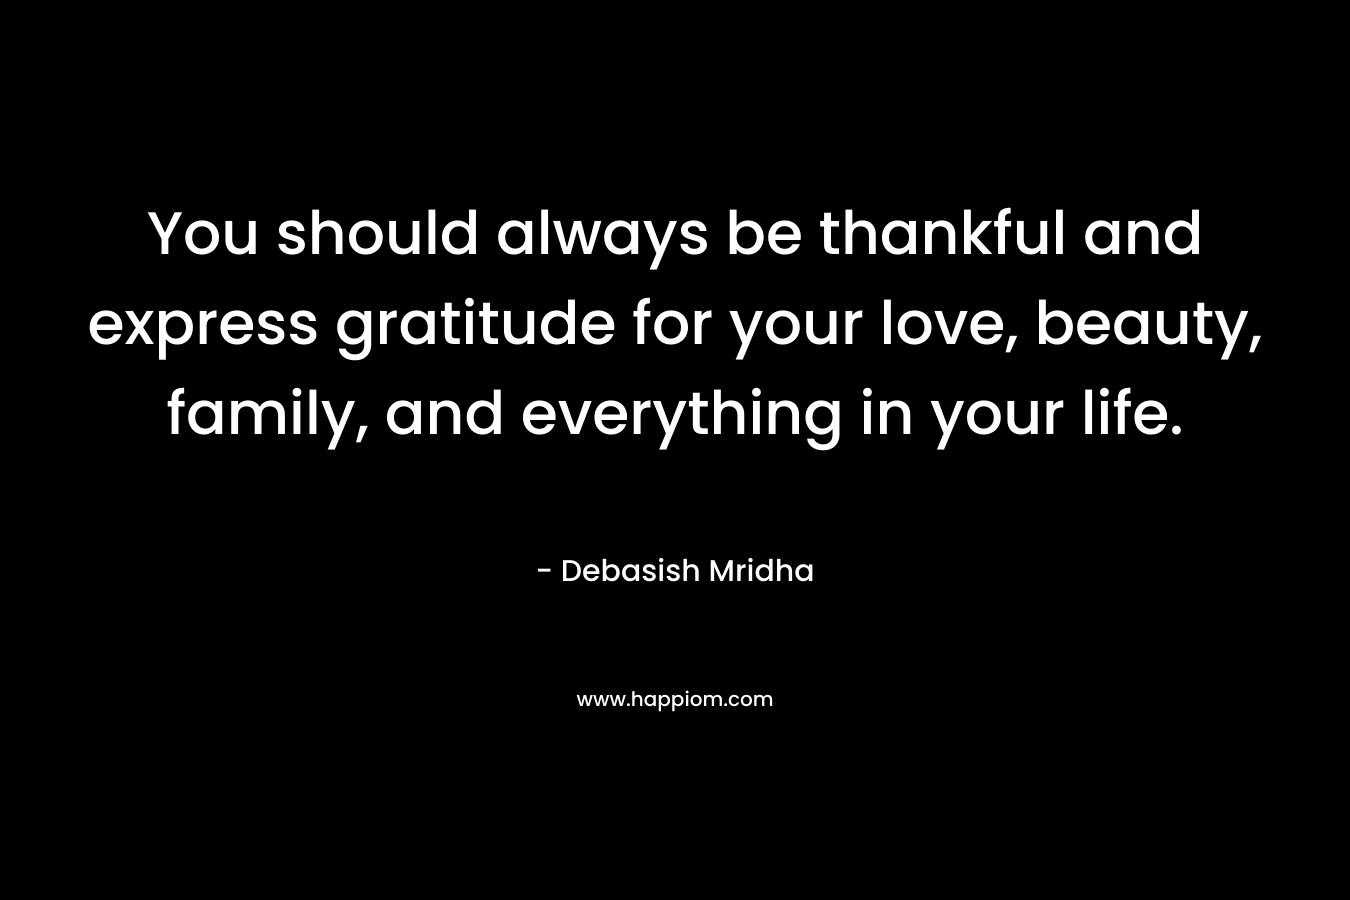 You should always be thankful and express gratitude for your love, beauty, family, and everything in your life.